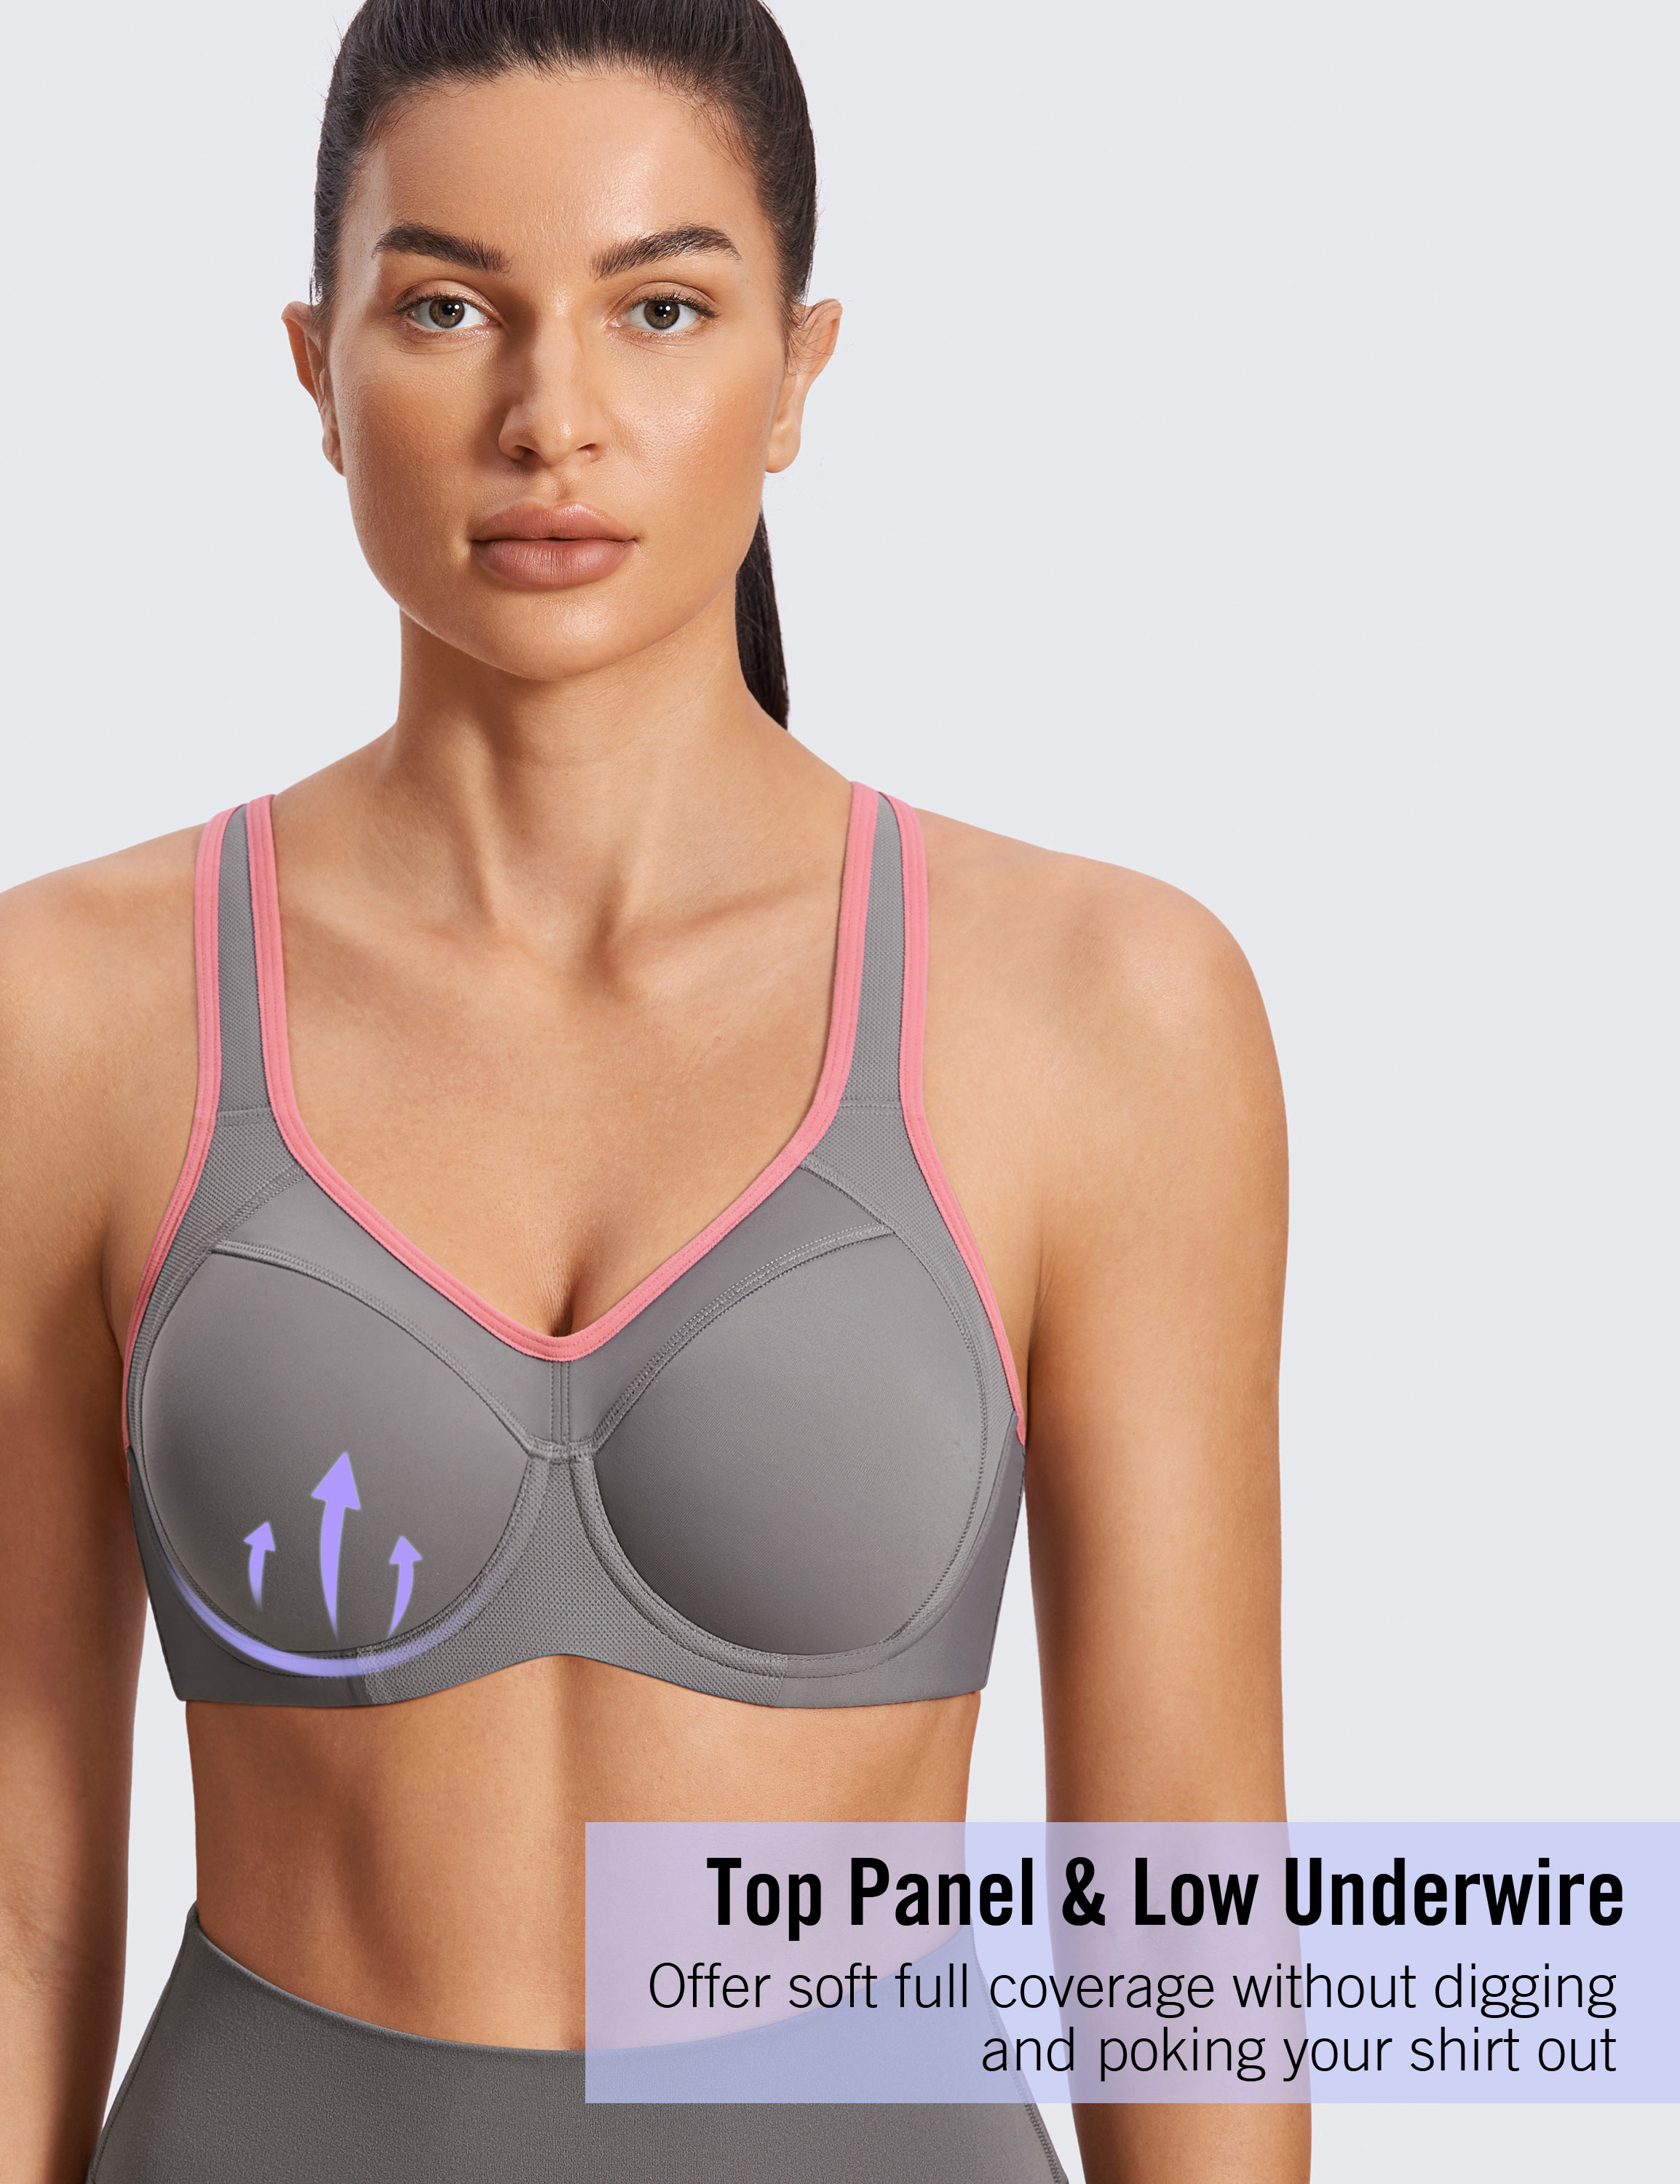 SYROKAN High Impact Sports Bras for Women Support Underwire Cross